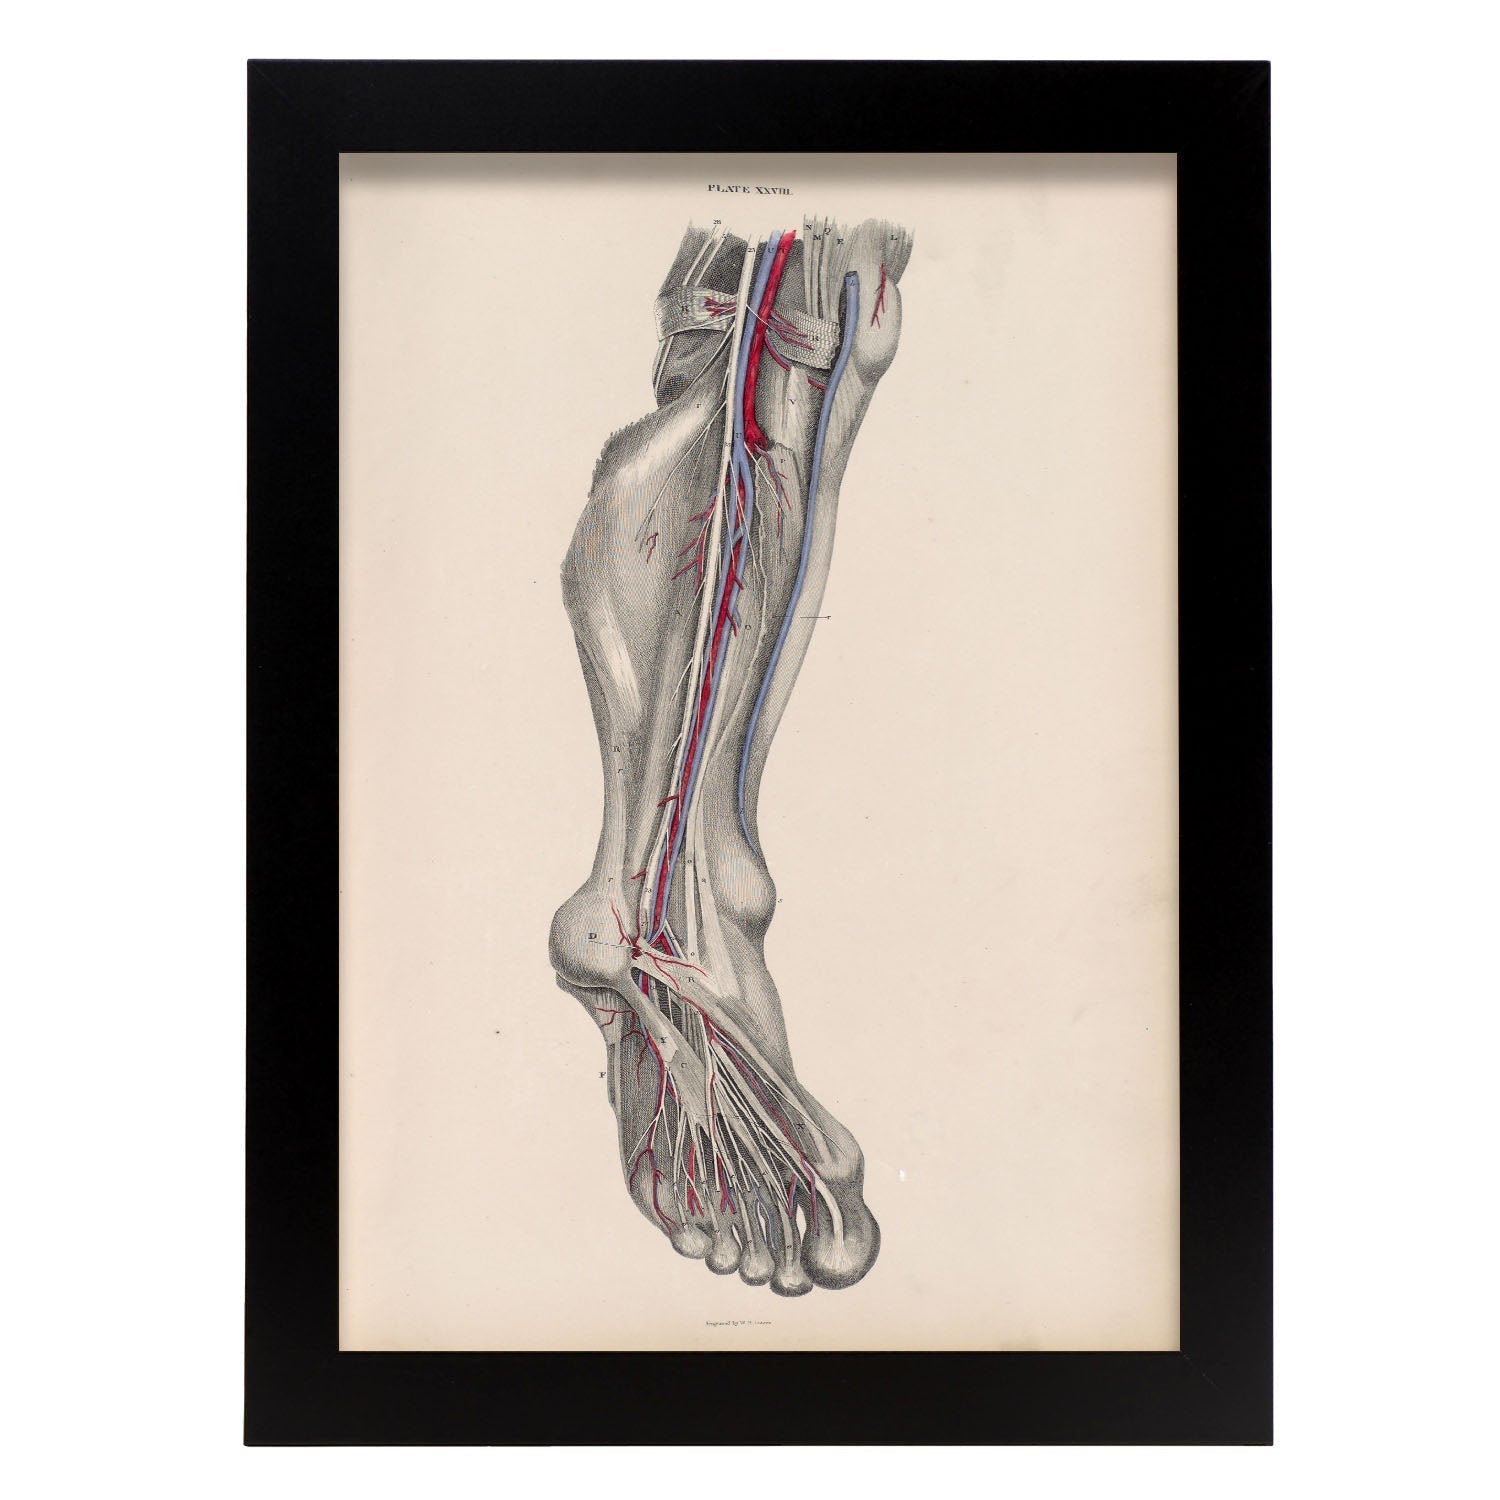 Dissection of the lower leg and foot-Artwork-Nacnic-A4-Sin marco-Nacnic Estudio SL